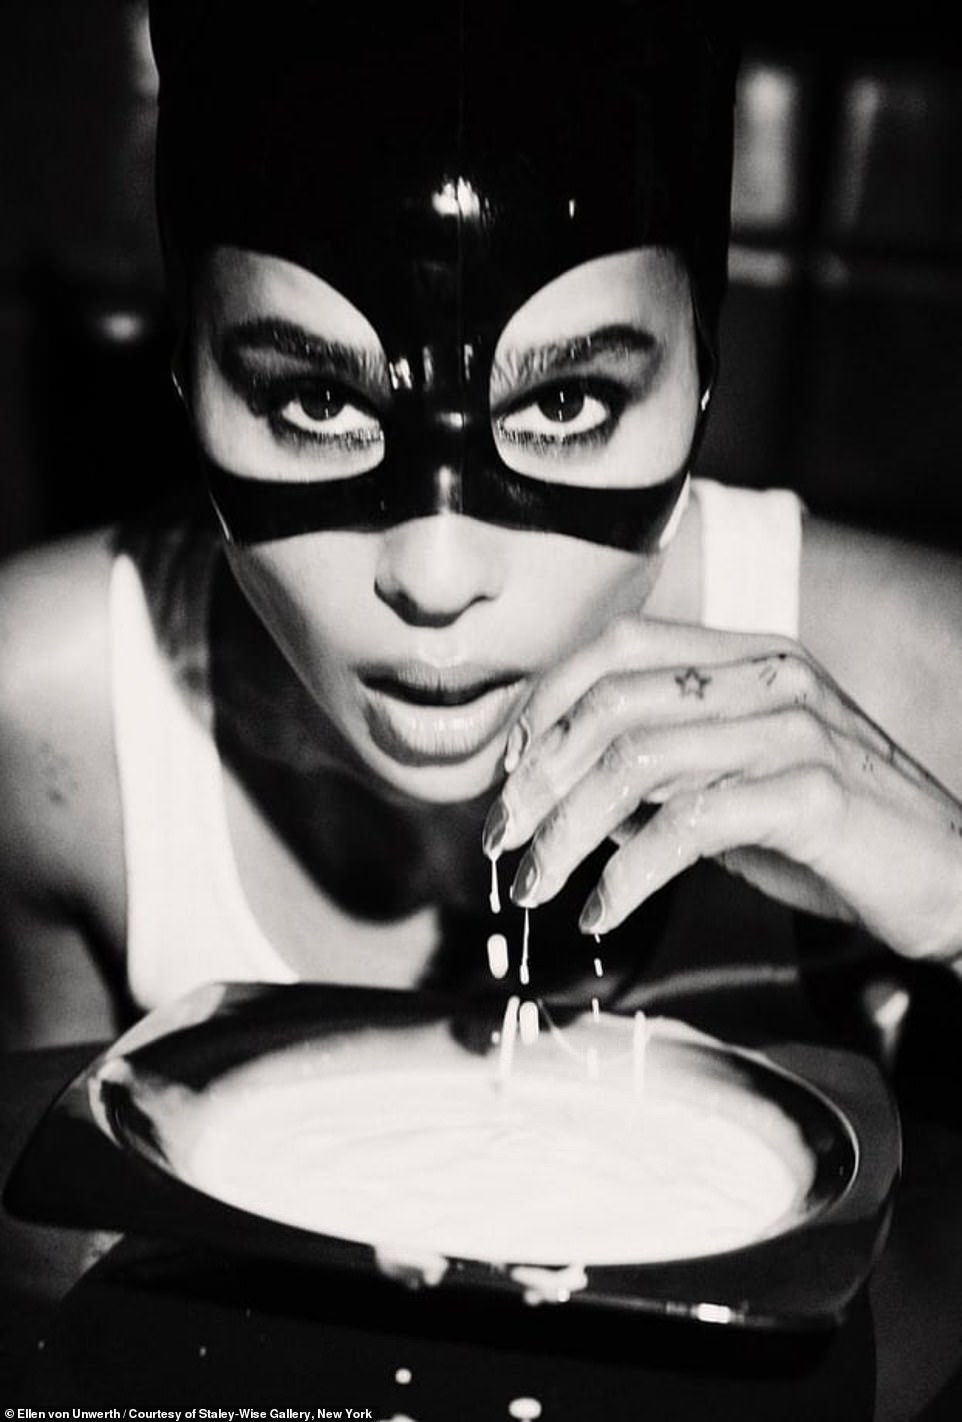 And one from 2005 shows Catwoman alum Zoë Kravitz leaning over a bowl wearing a black mask.